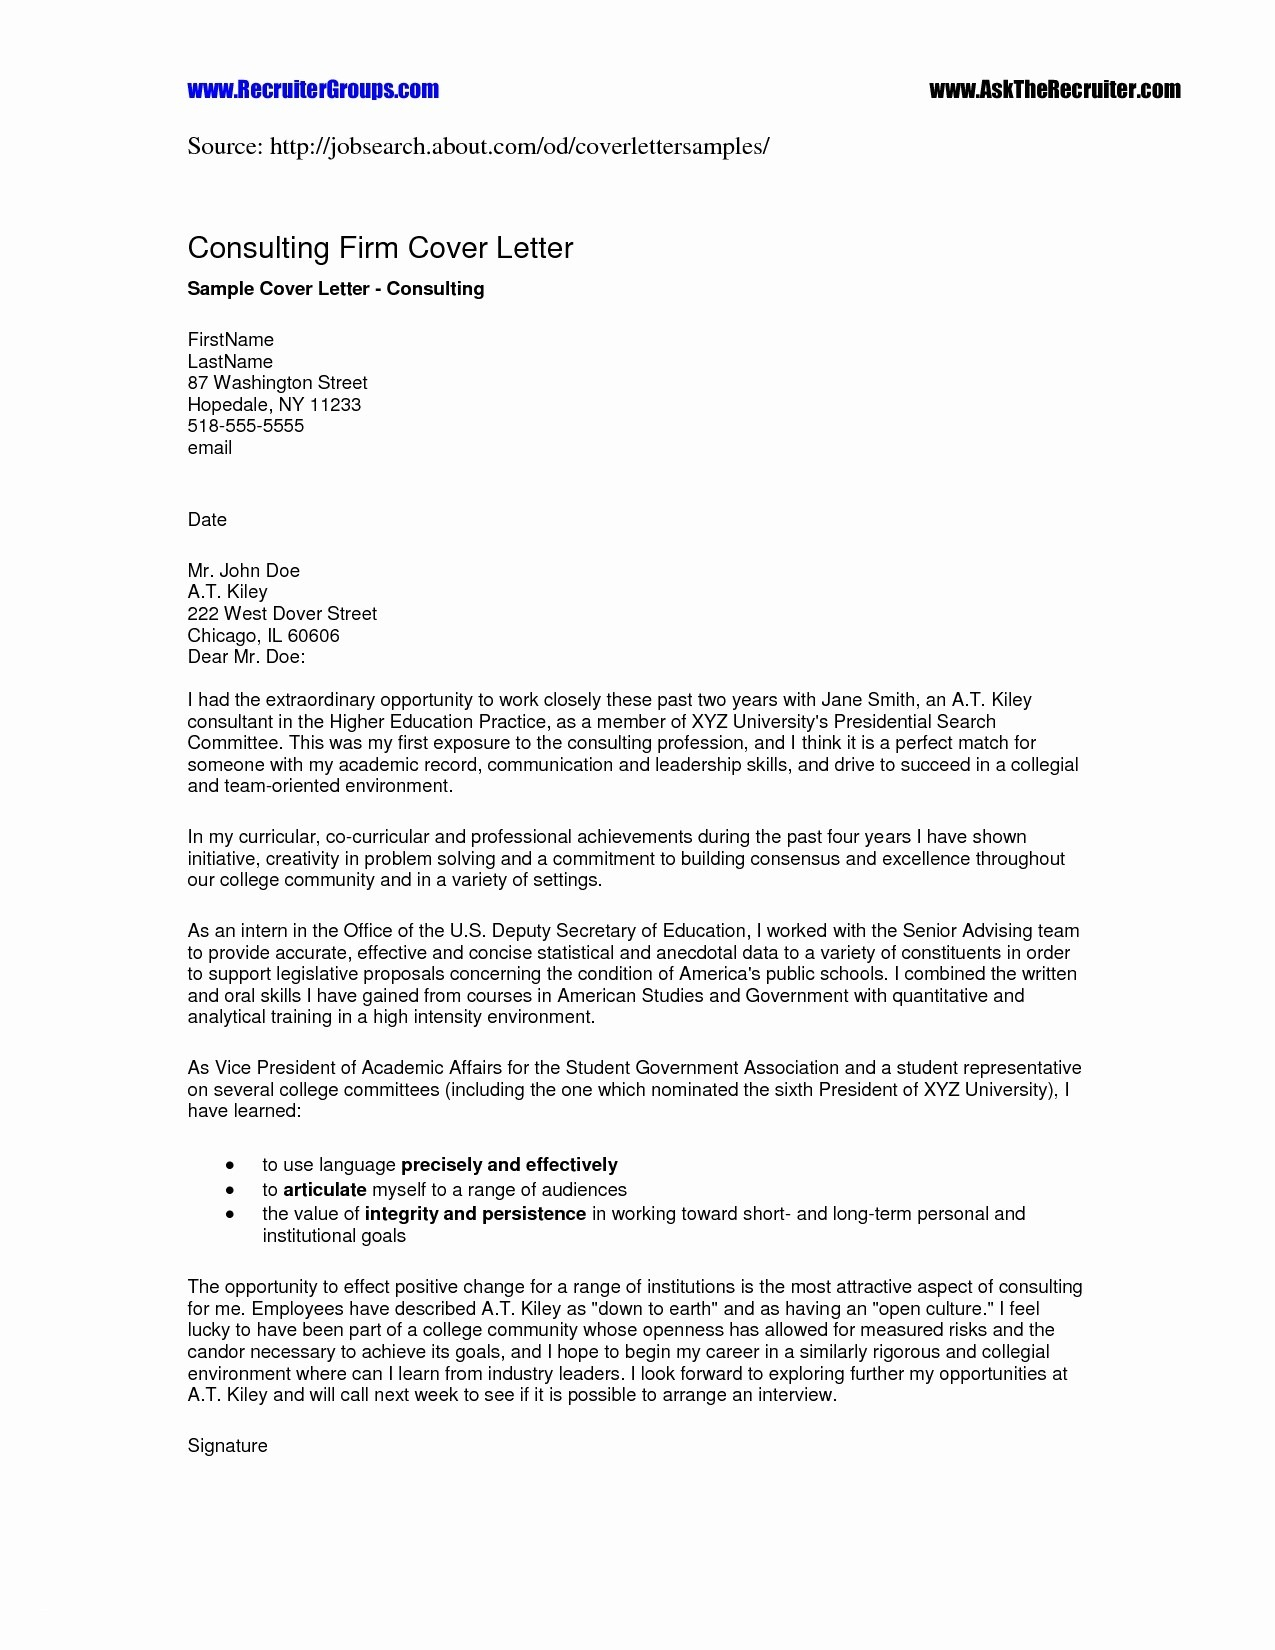 letter of good conduct template example-Free Reference Template for Resume Inspirational Sample Cover Letter for Good Conduct Certificate Fresh Reference 17-e